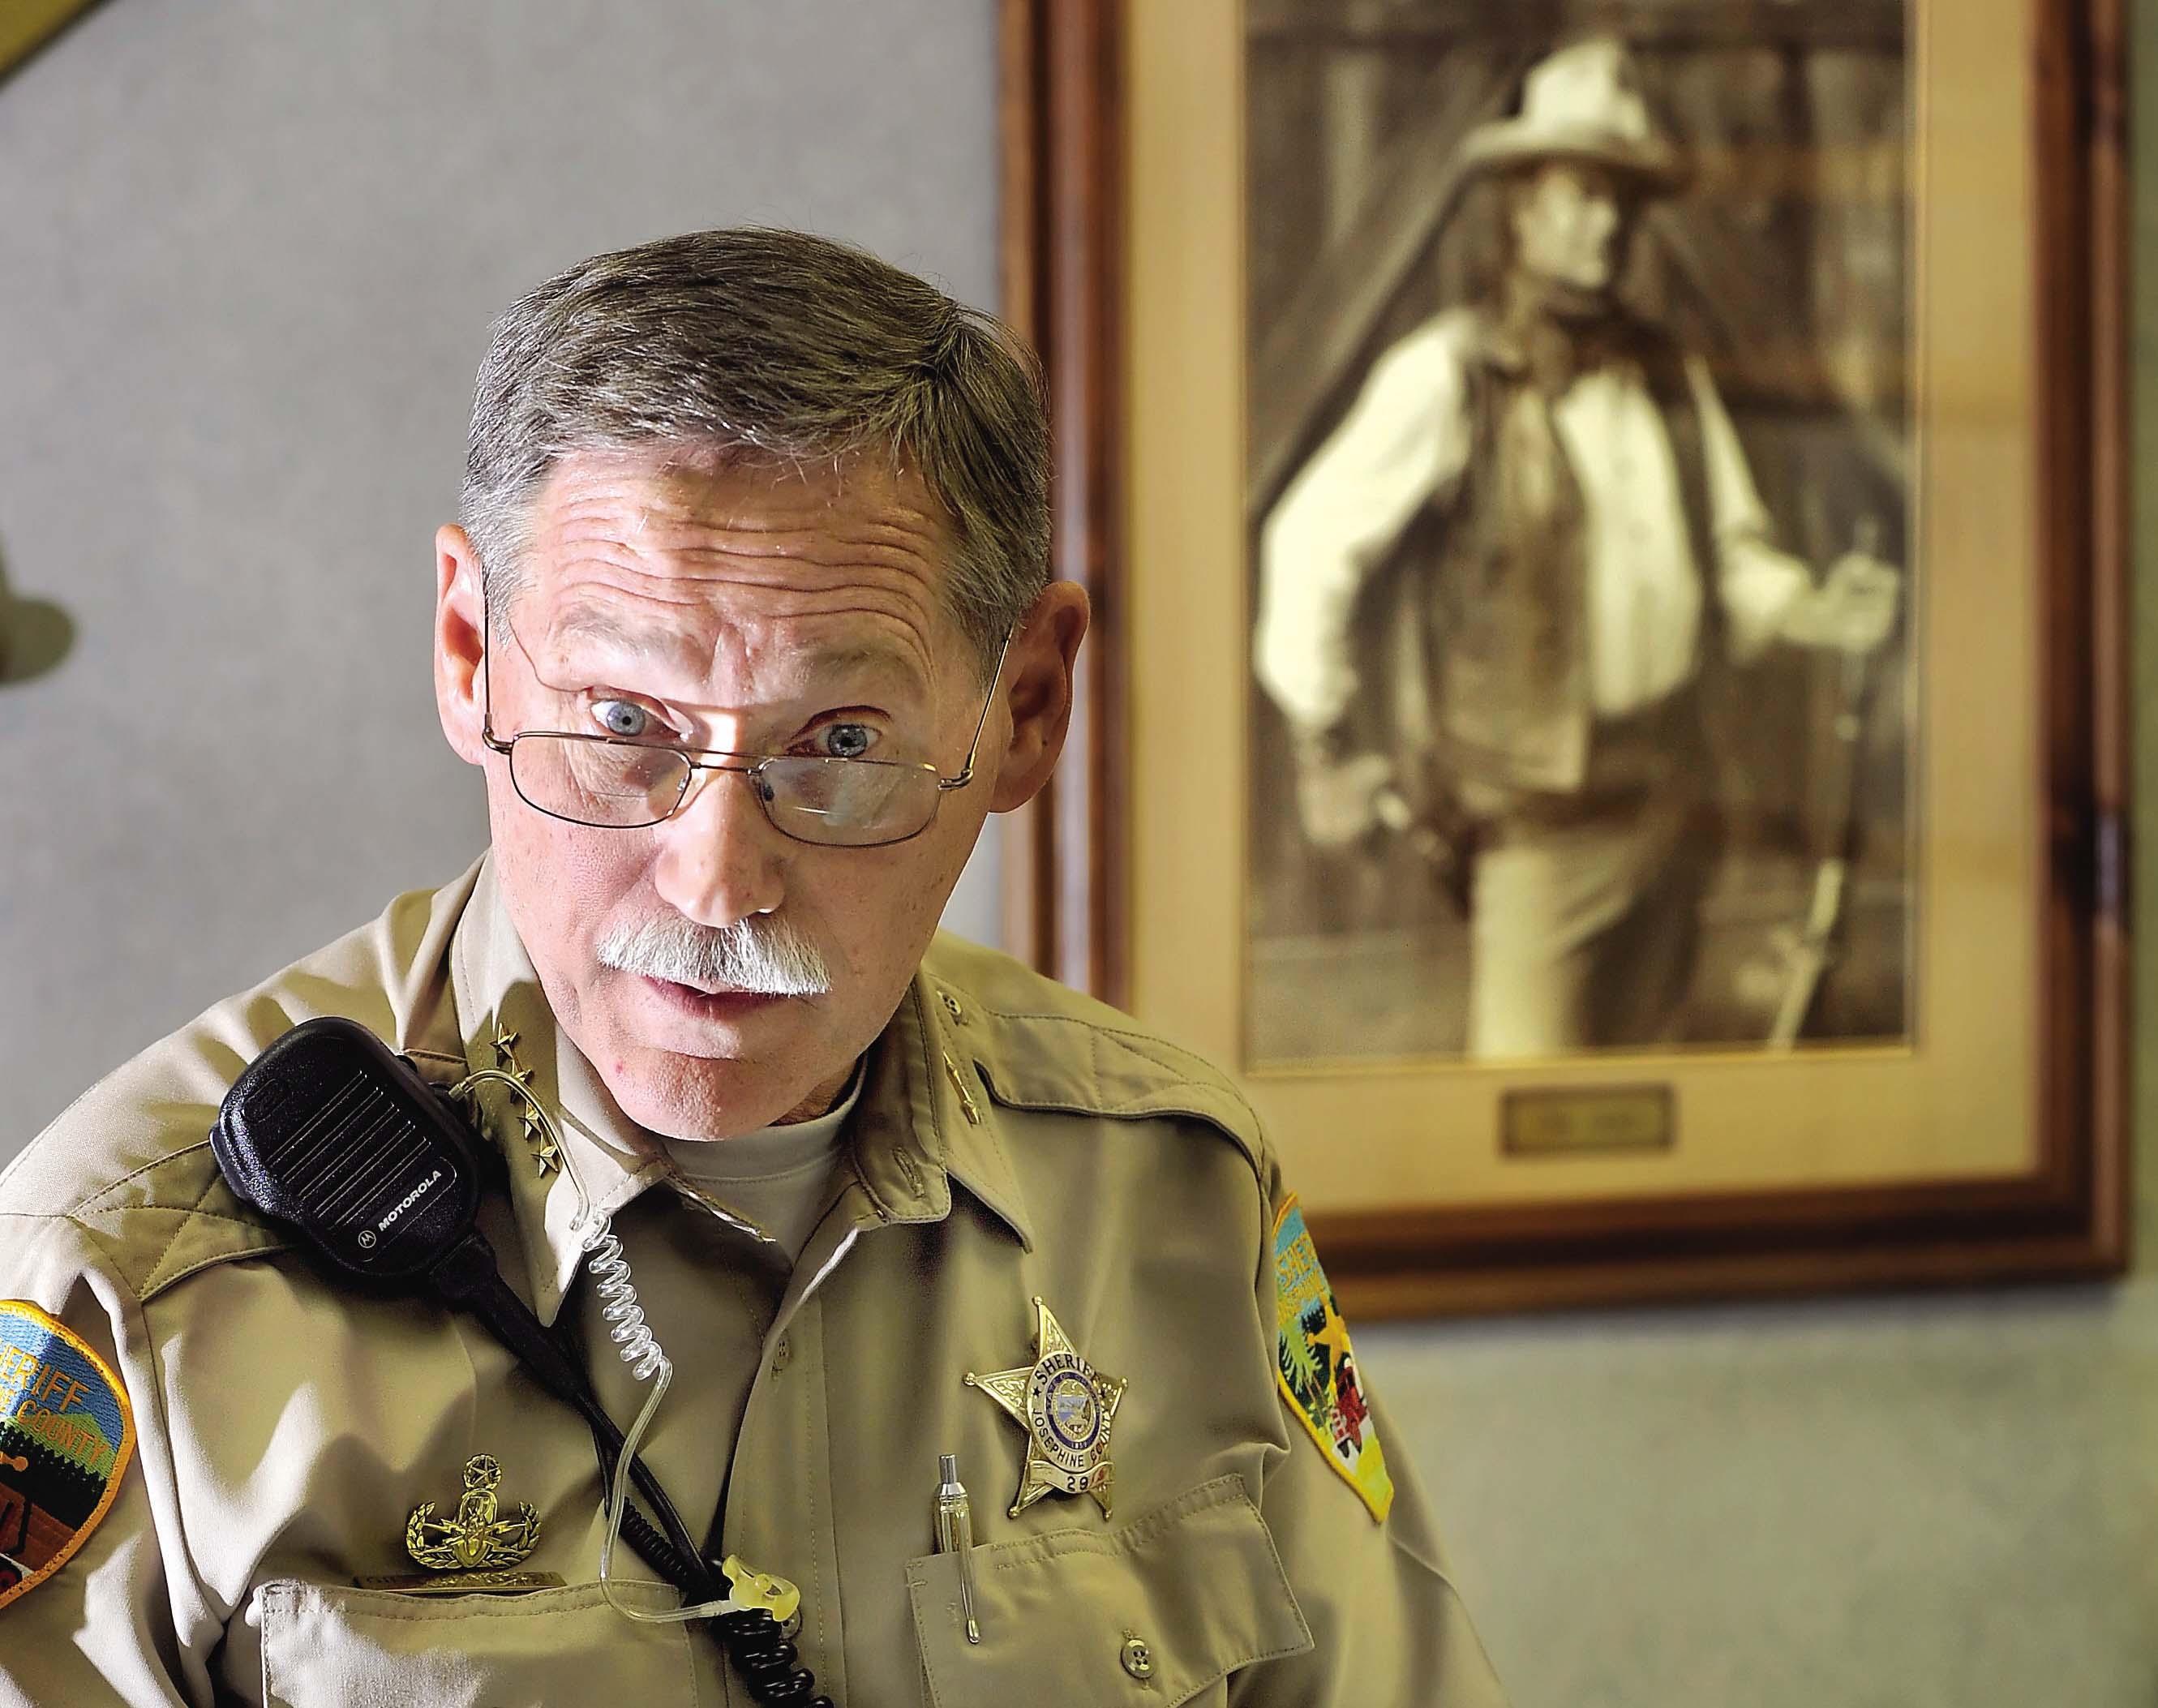 Josephine County, Ore., Sheriff Gil Gilbertson is one of a growing number of rural sheriffs and lawmakers vowing to ignore any new gun control legislation, or even make it a crime for federal officials to enforce federal gun policy.